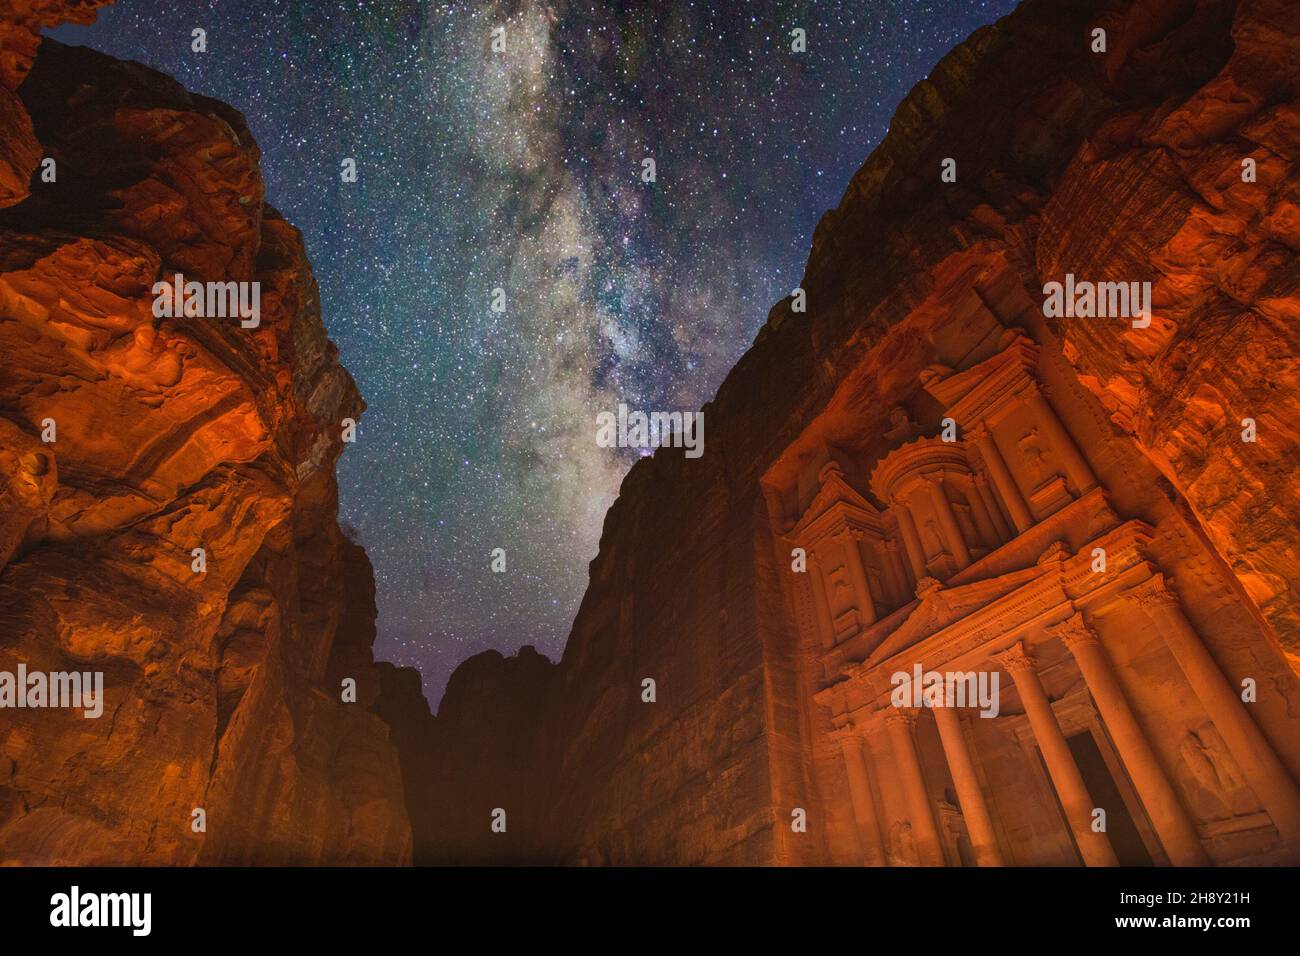 Milky Way captured at Petra, Jordan. Multiple exposures blended to have faded tails on star trails.  Stock Photo